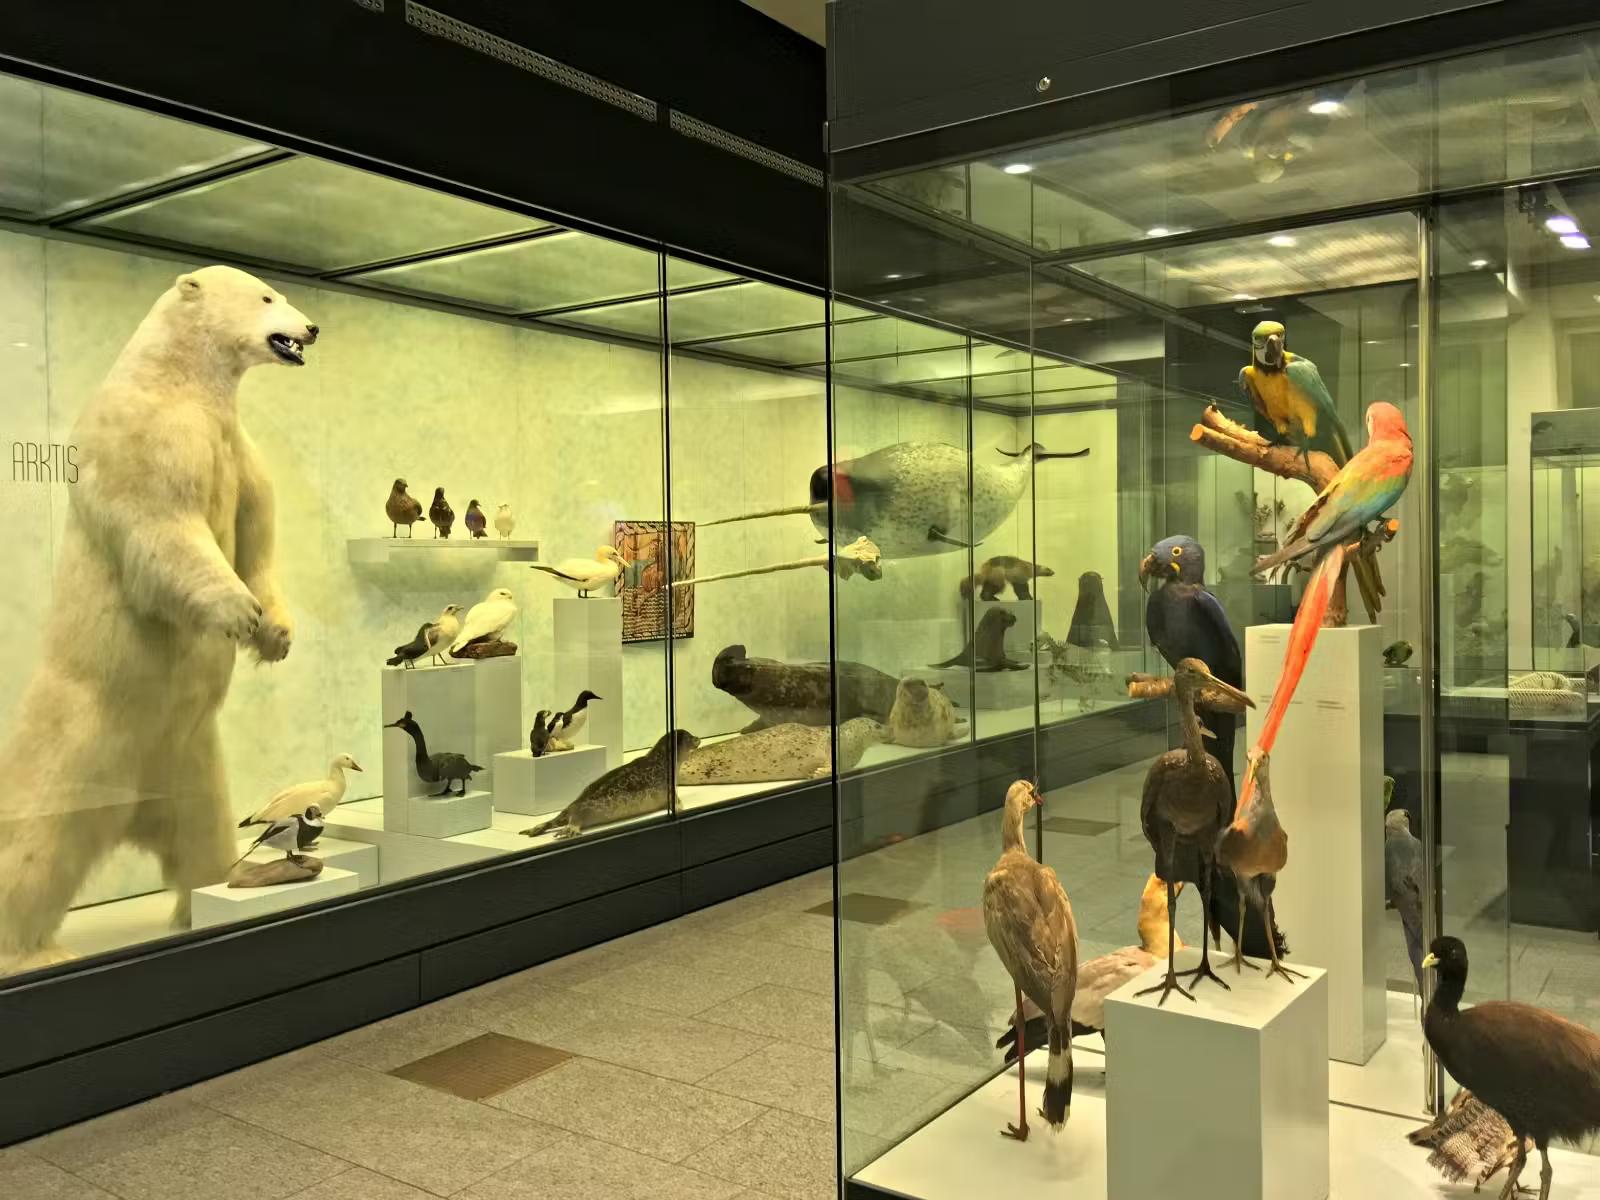 Stuffed animals, including a polar bear, in display cases at the Zoological Museum in Zürich, Switzerland